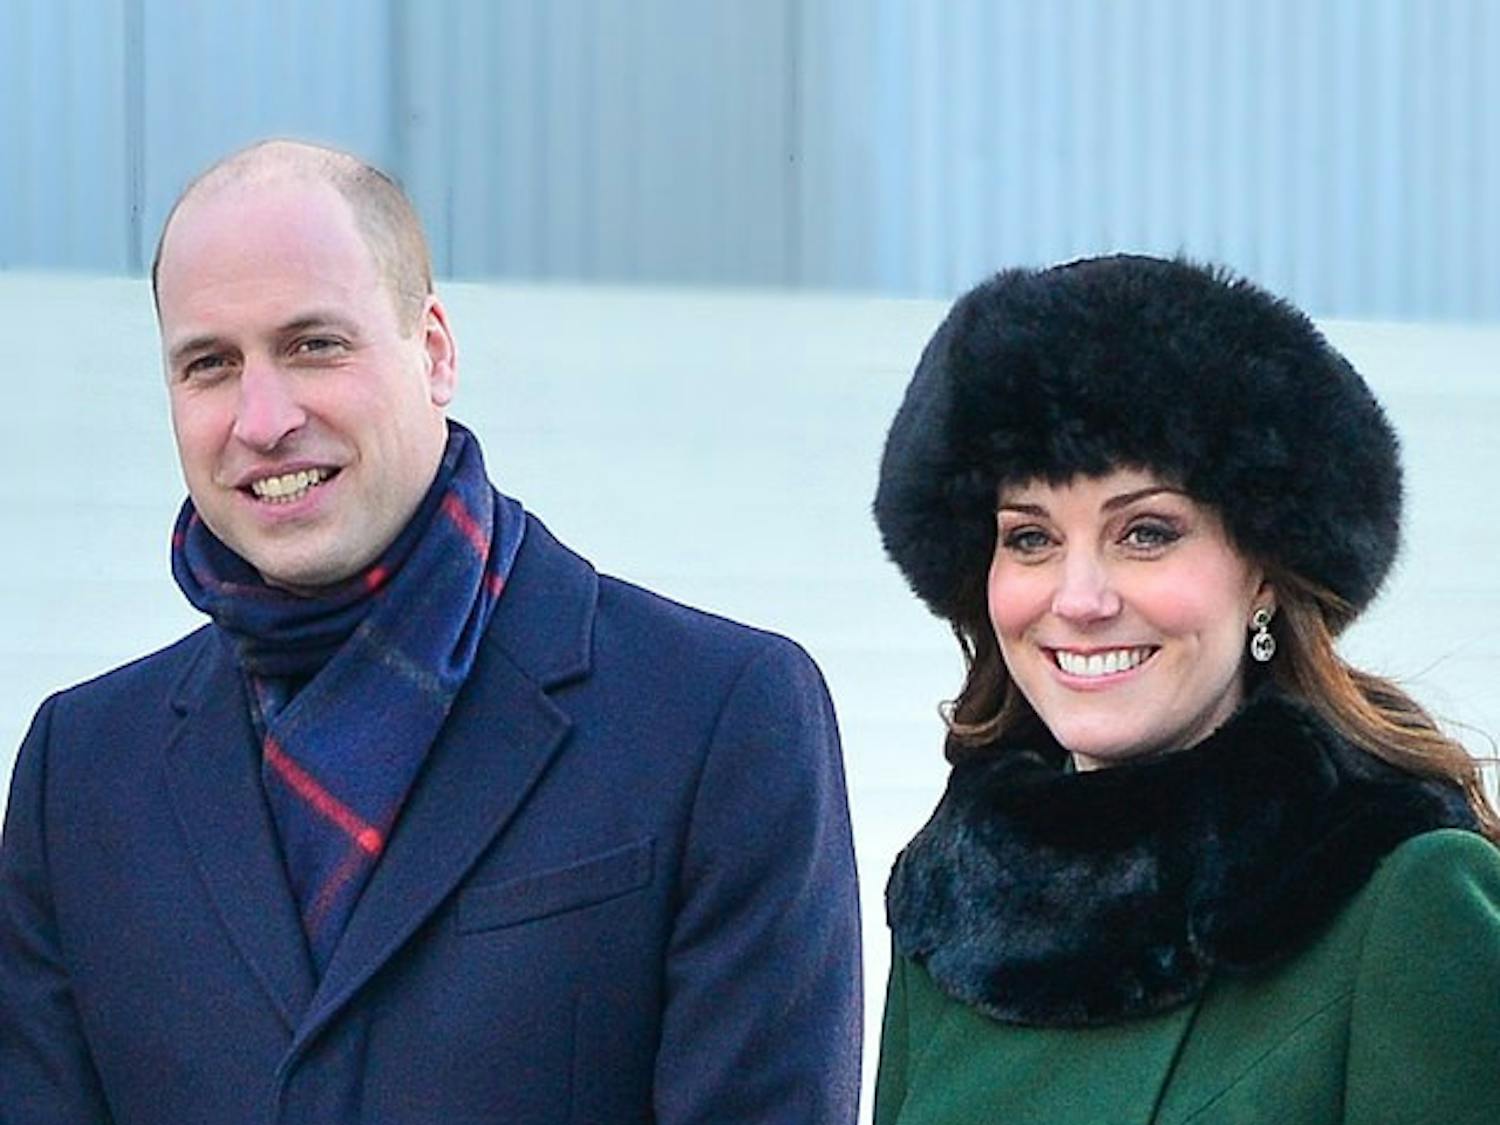 Prince_William_and_Duchess_Kate_of_Cambridge_visits_Sweden_02